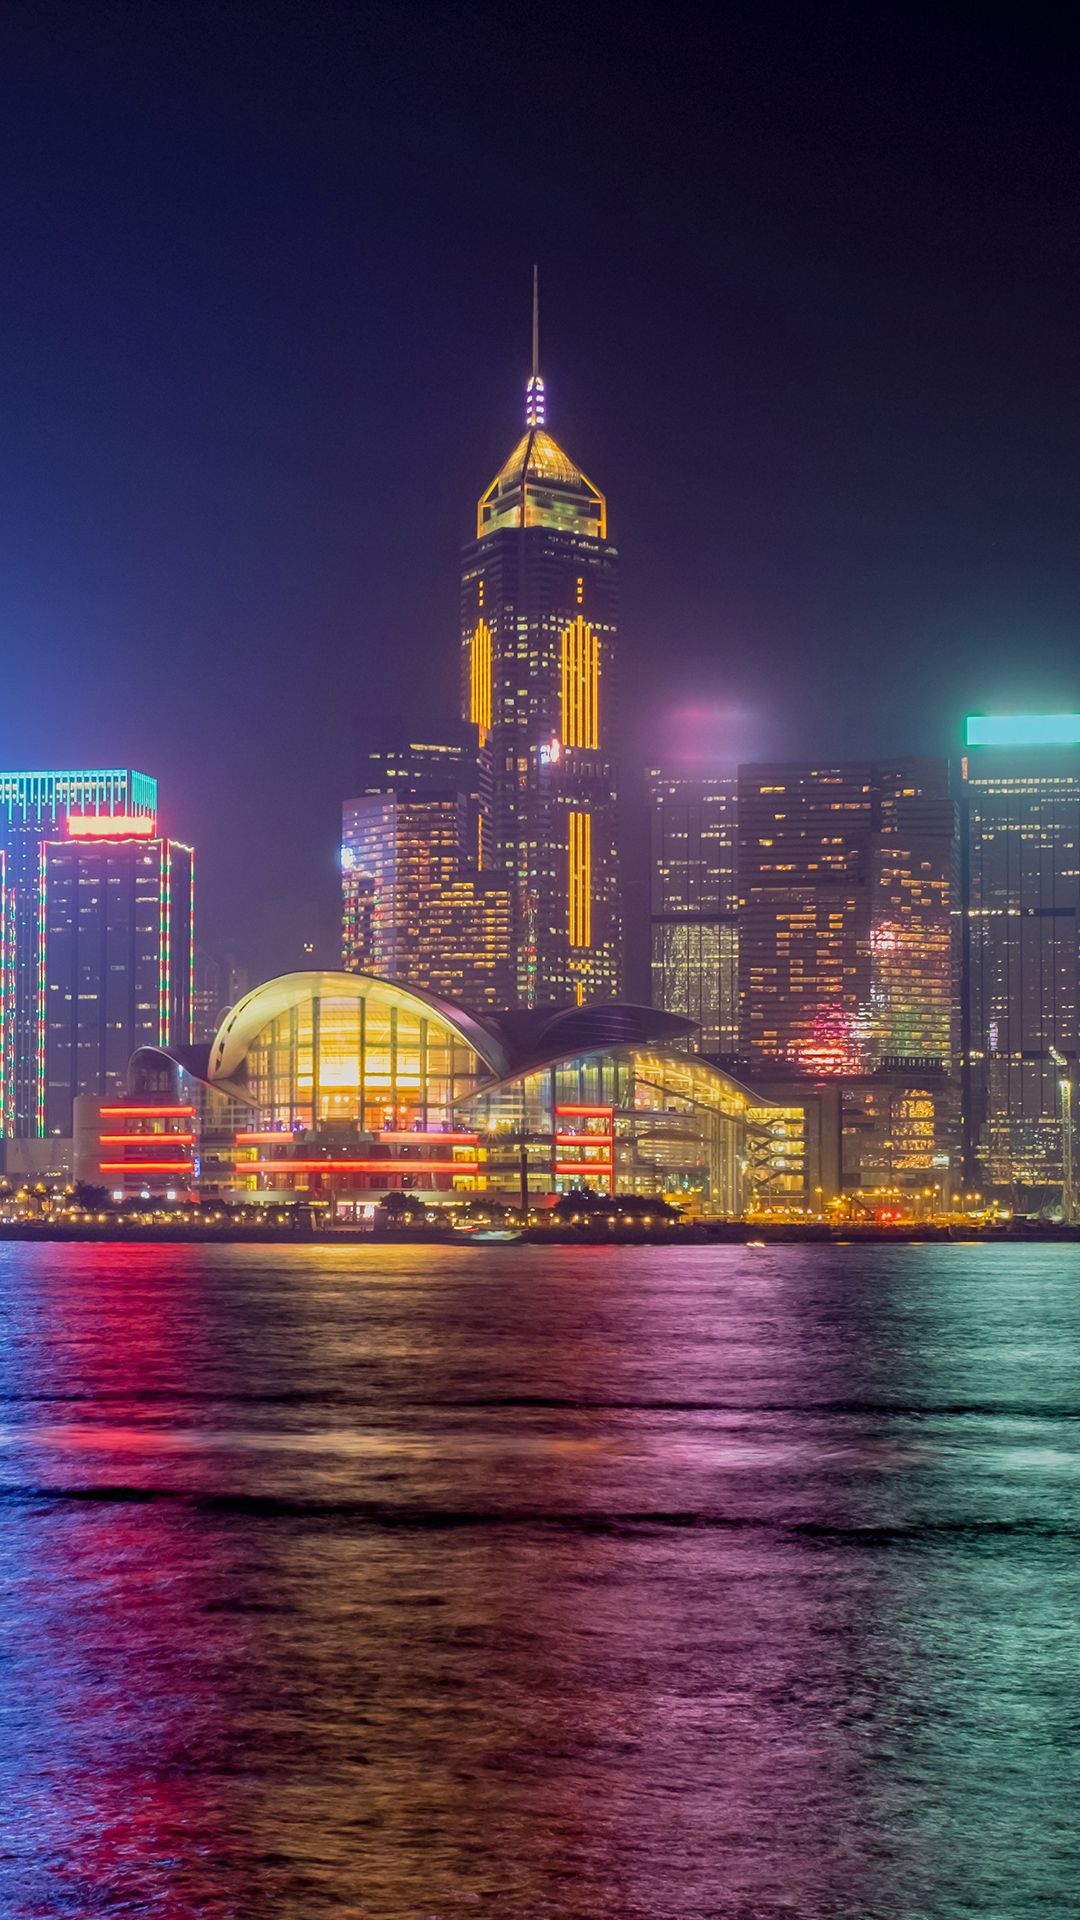 Wallpaper, architecture, building, cityscape, skyscraper, city, portrait display, Hong Kong, water, colorful, reflection, night, lights 1080x1920